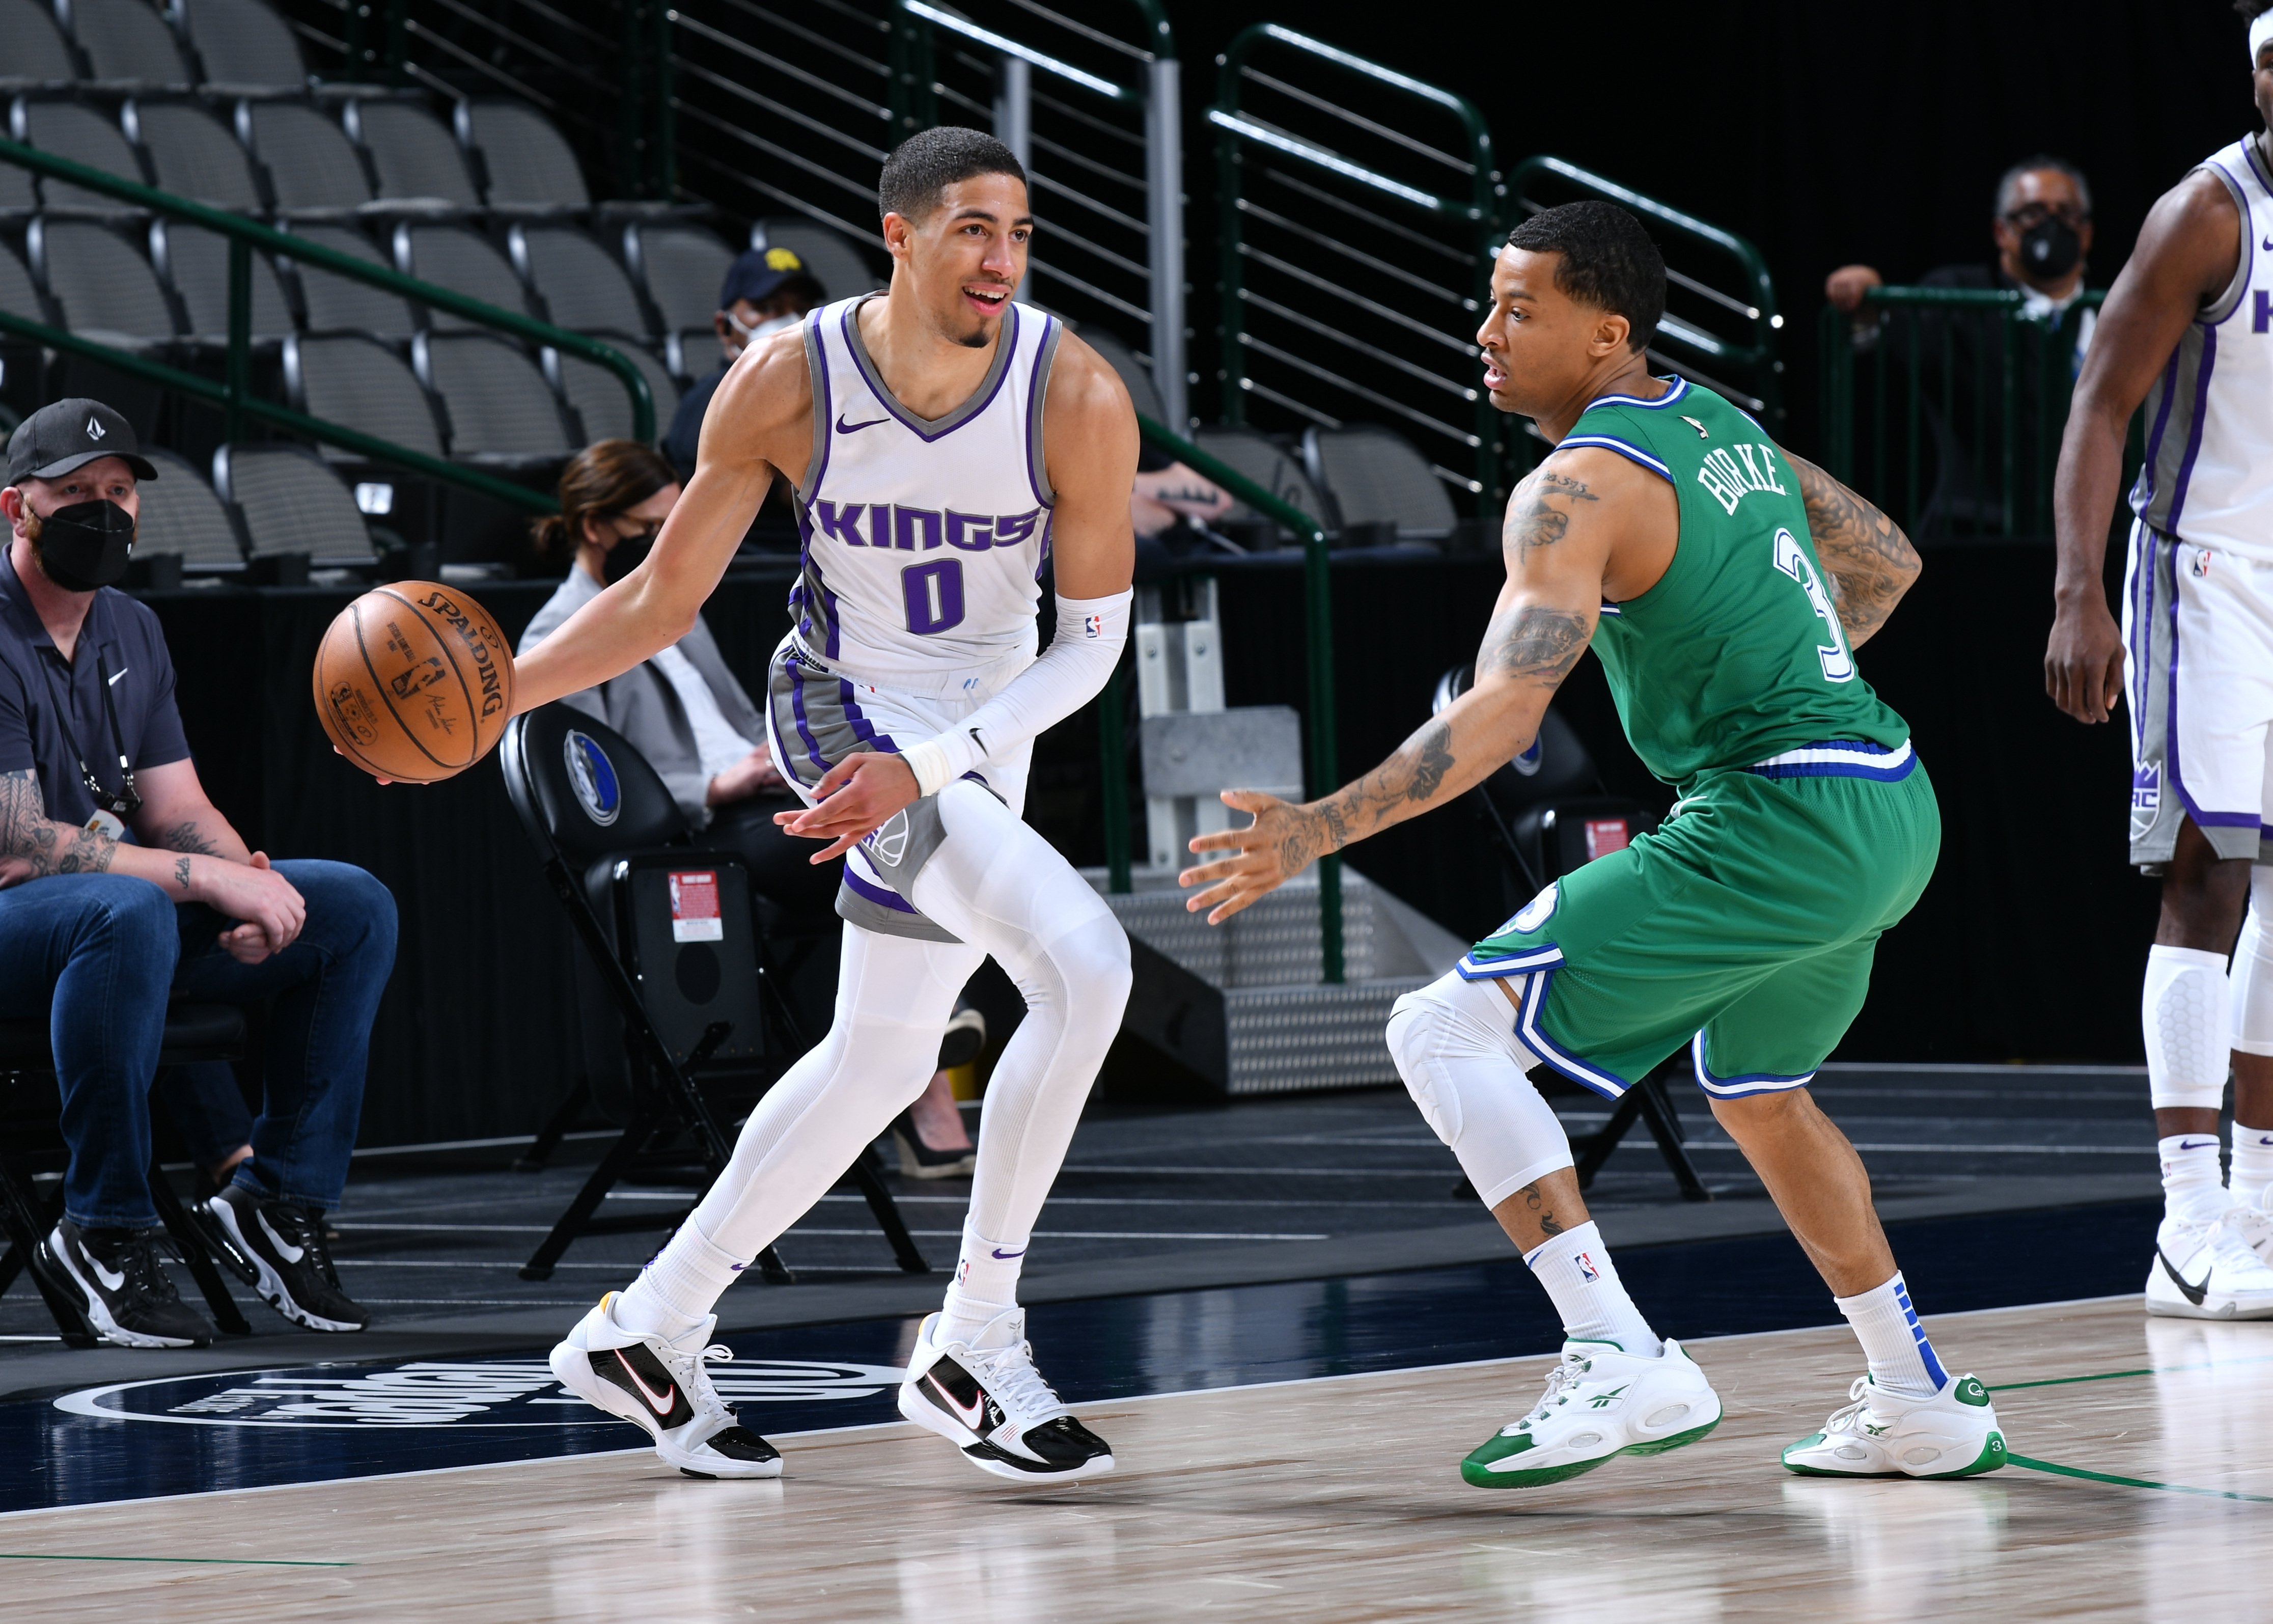 Tyrese Haliburton of the Sacramento Kings handles the ball during the game against the Dallas Mavericks on May 2, 2021 at the American Airlines Center in Dallas, Texas.&nbsp;